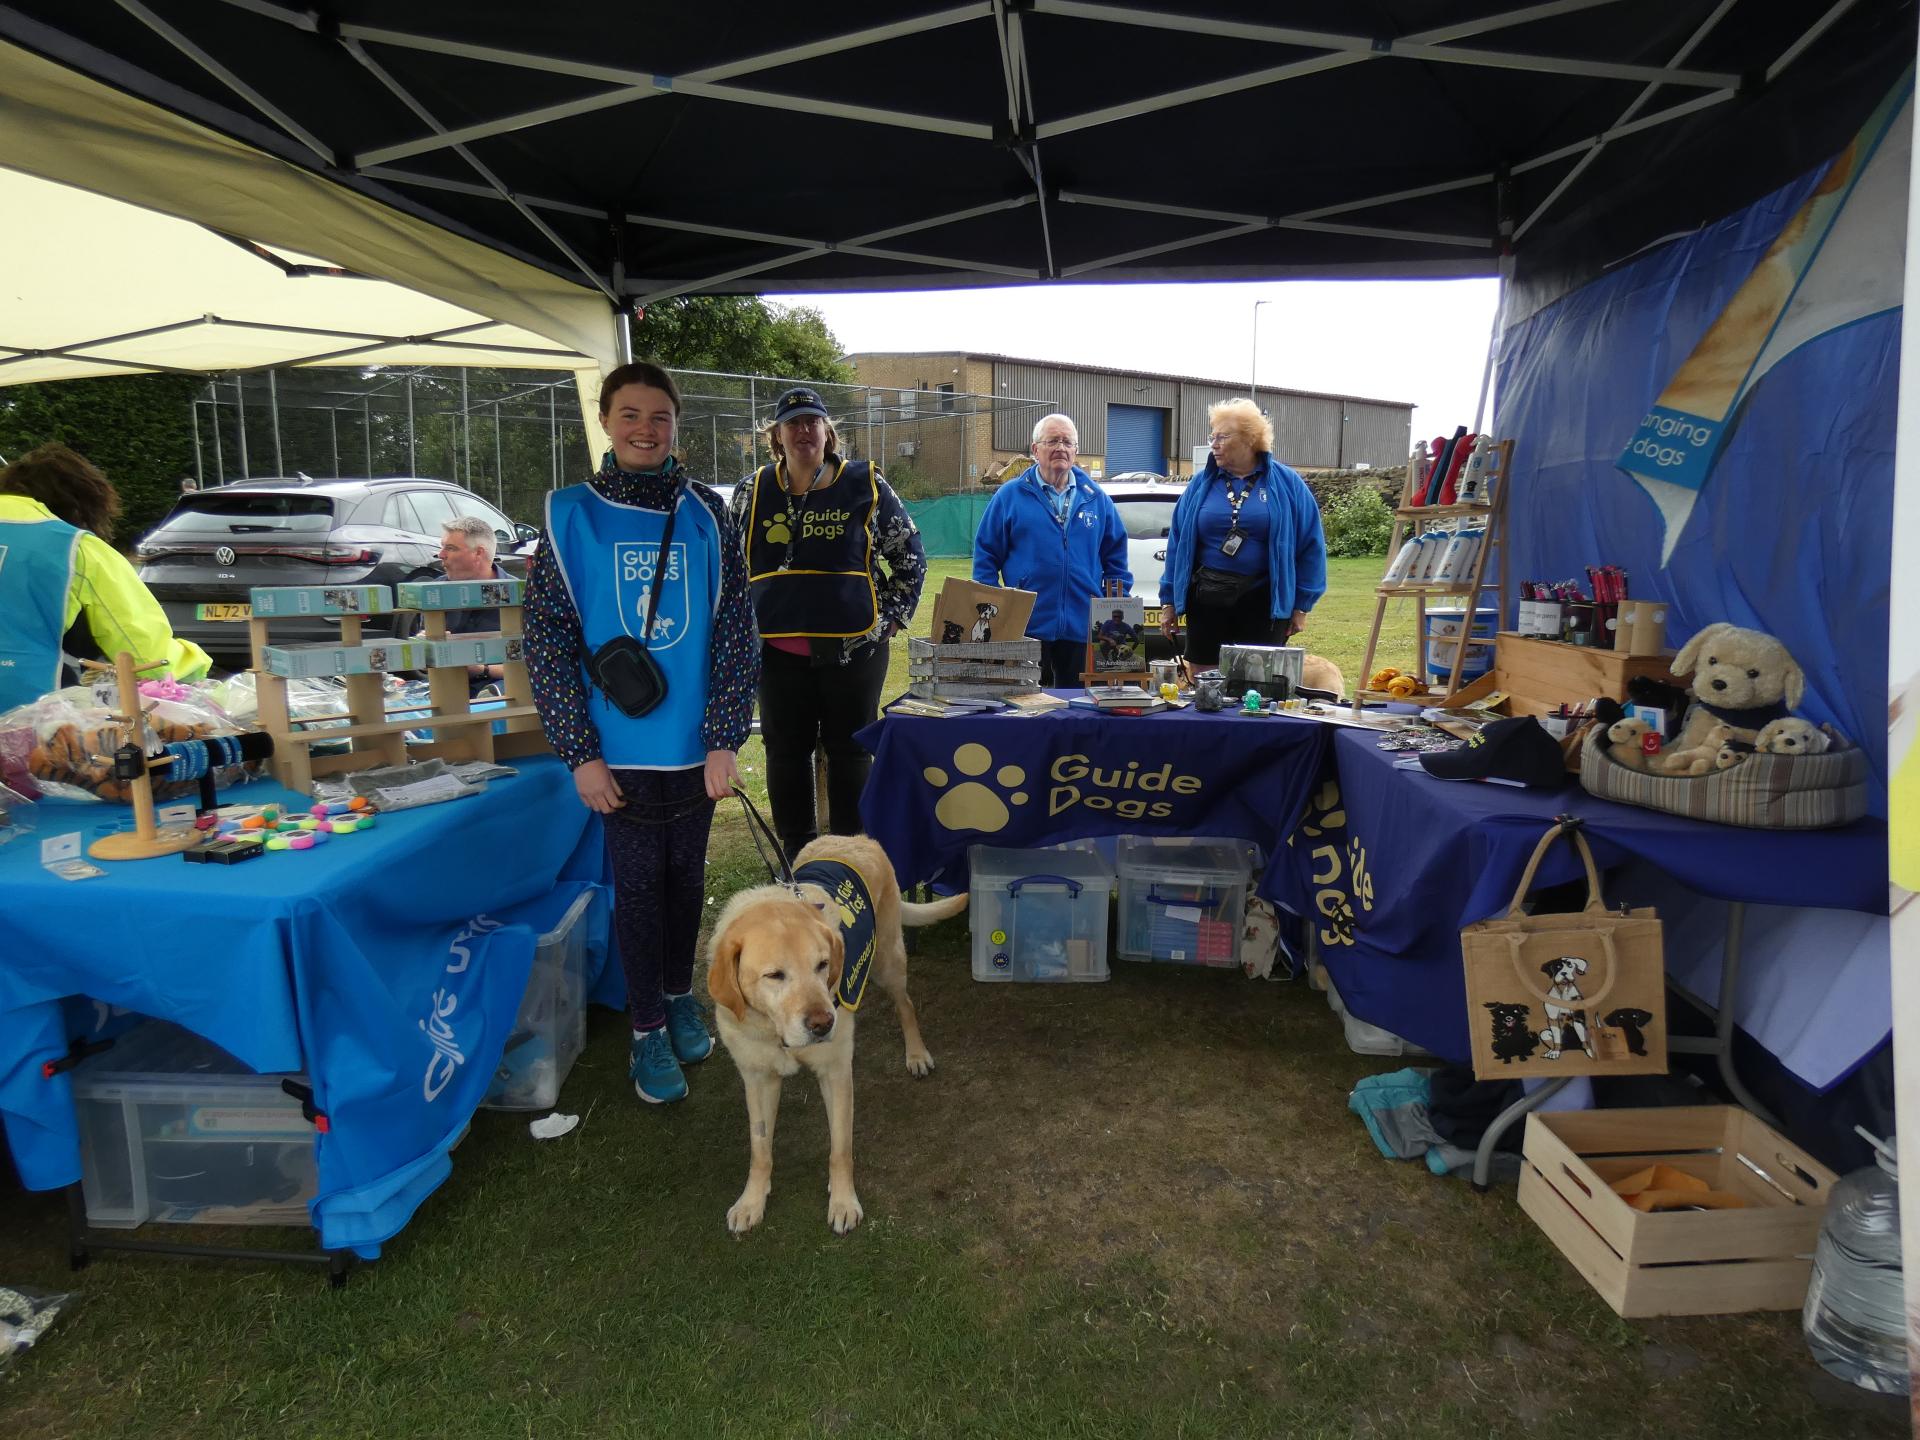 Members of the Airedale and Wharfedale fundraising group, including a yellow Labrador in a Guide Dogs training jacket, stand at a Guide Dogs stall